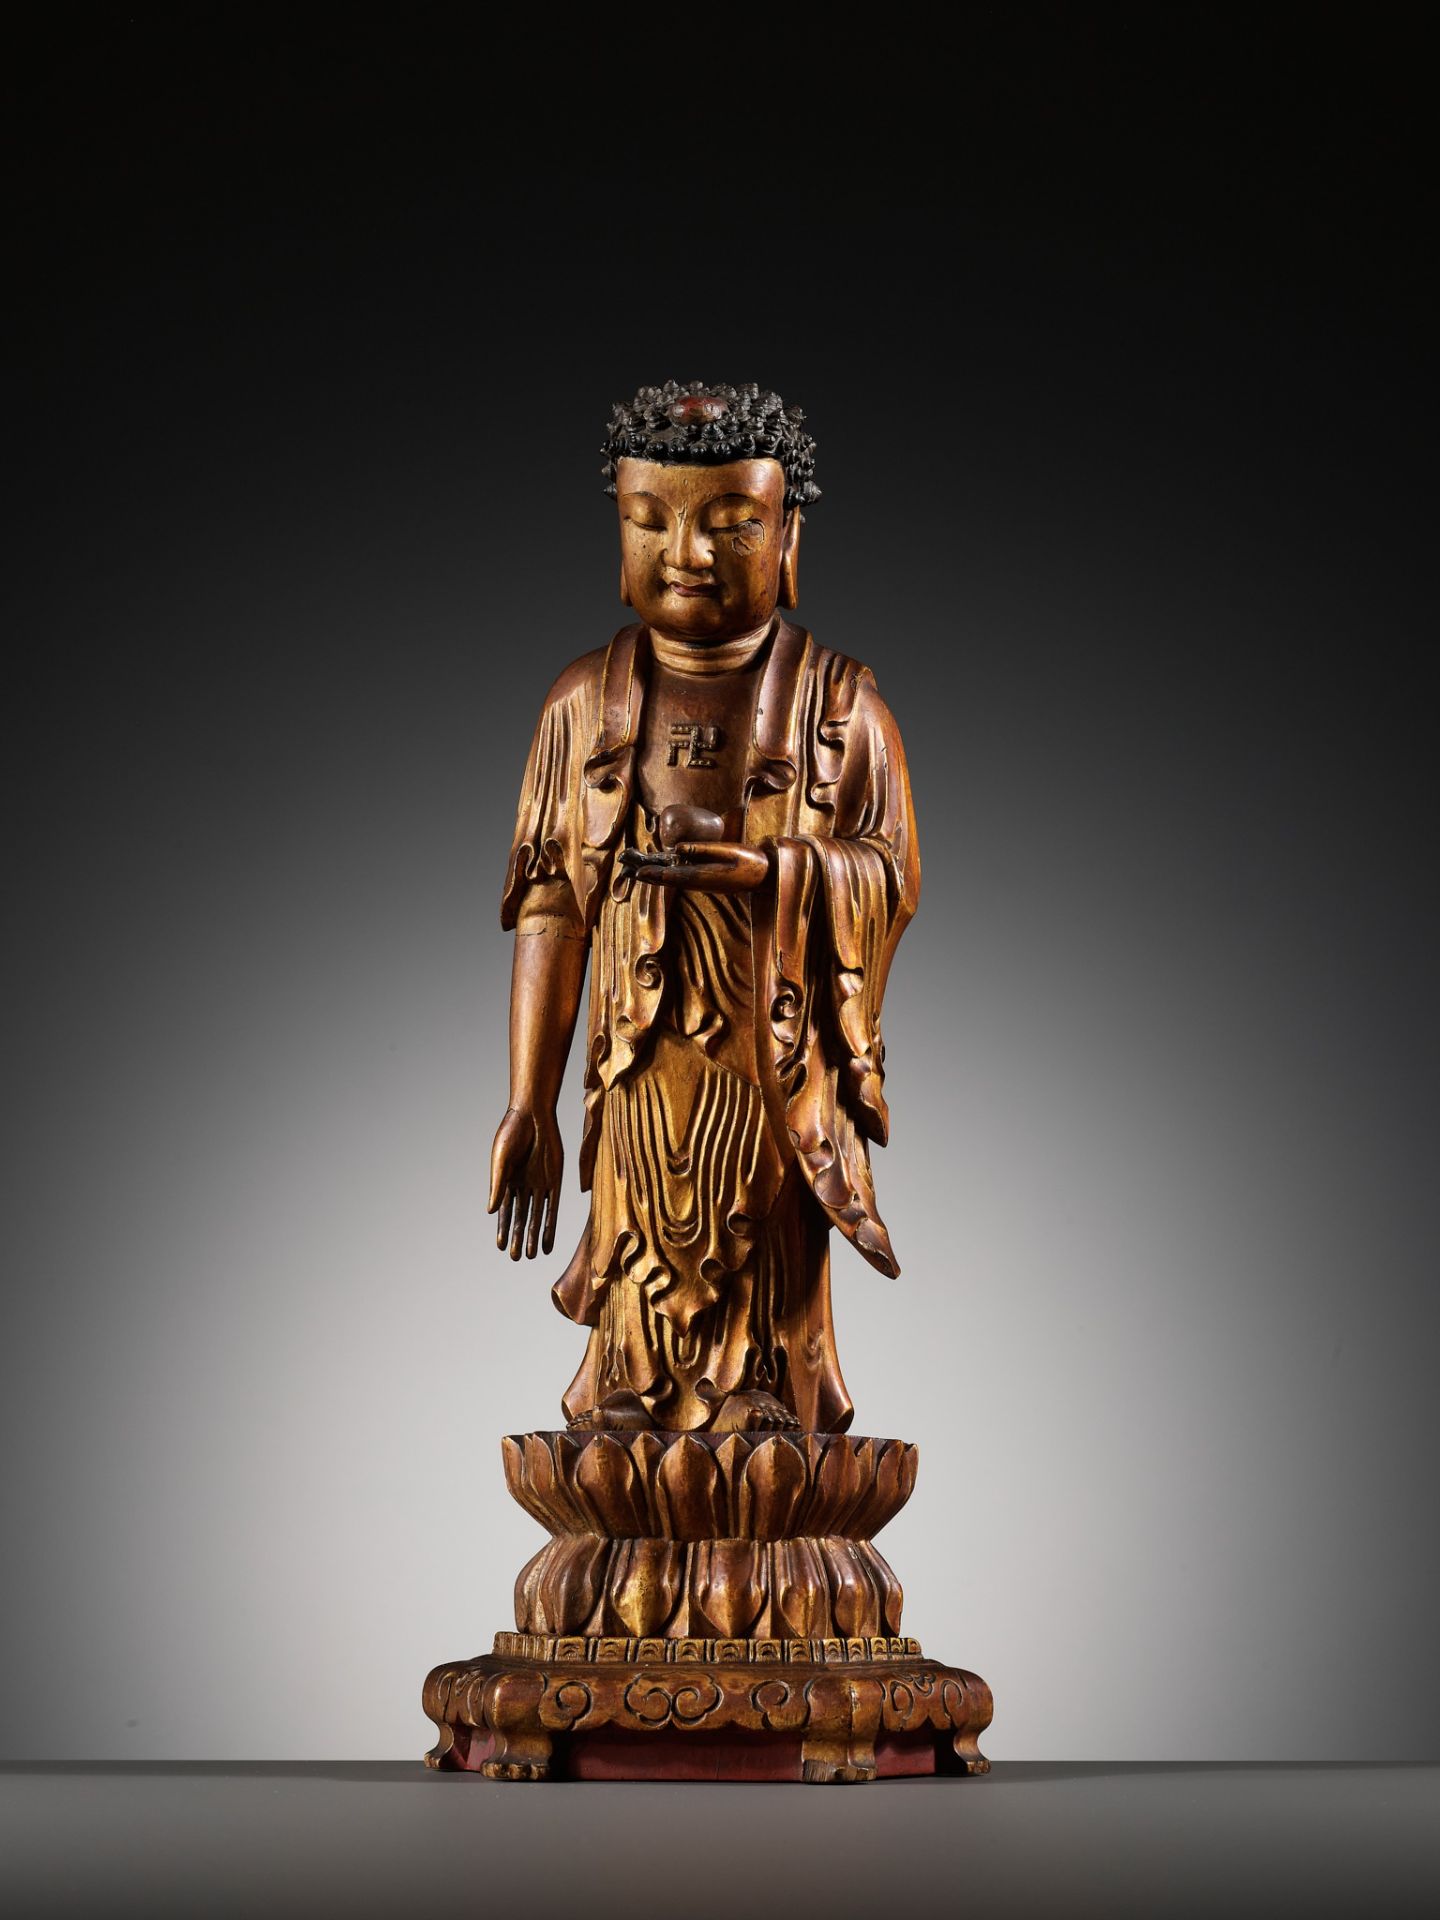 A LACQUER-GILT WOOD FIGURE OF THE STANDING BUDDHA, CHINA, 17TH - 18TH CENTURY - Image 7 of 15